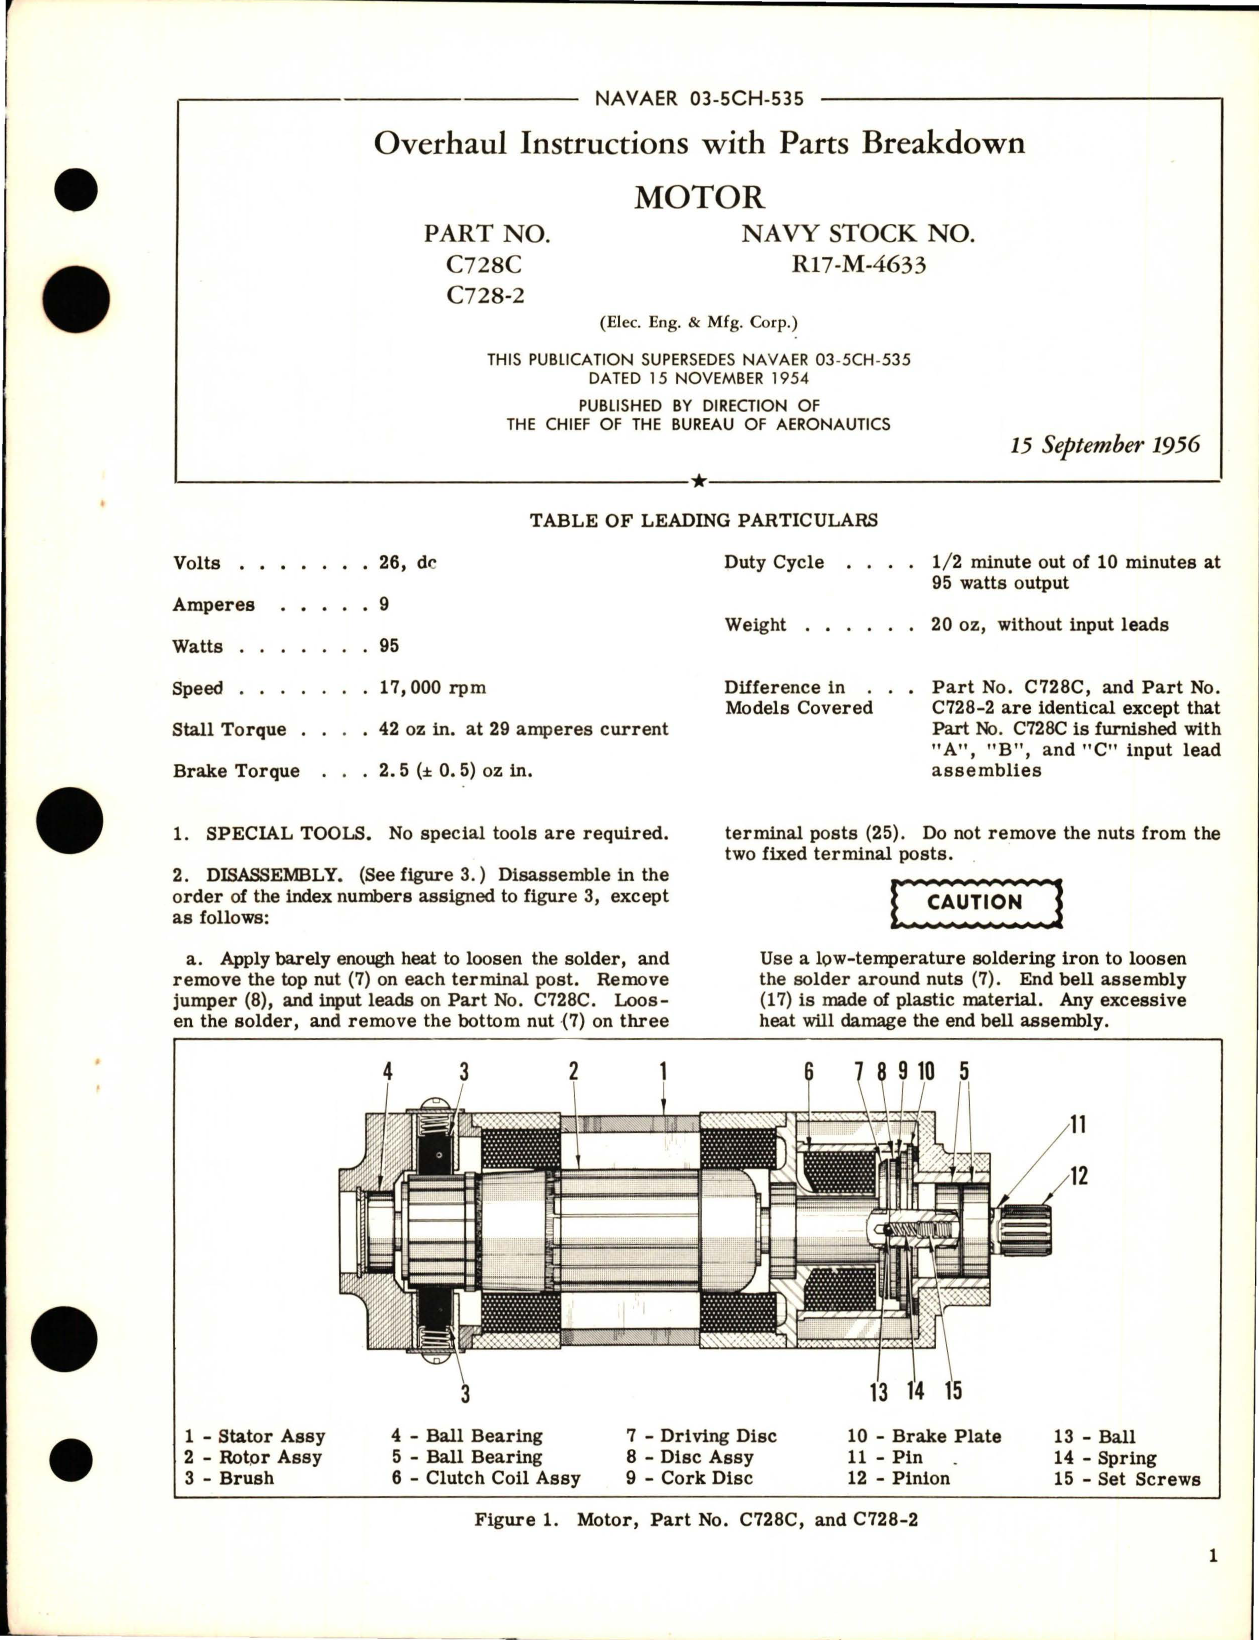 Sample page 1 from AirCorps Library document: Overhaul Instructions with Parts Breakdown for Motor - Parts C728C and C728-2